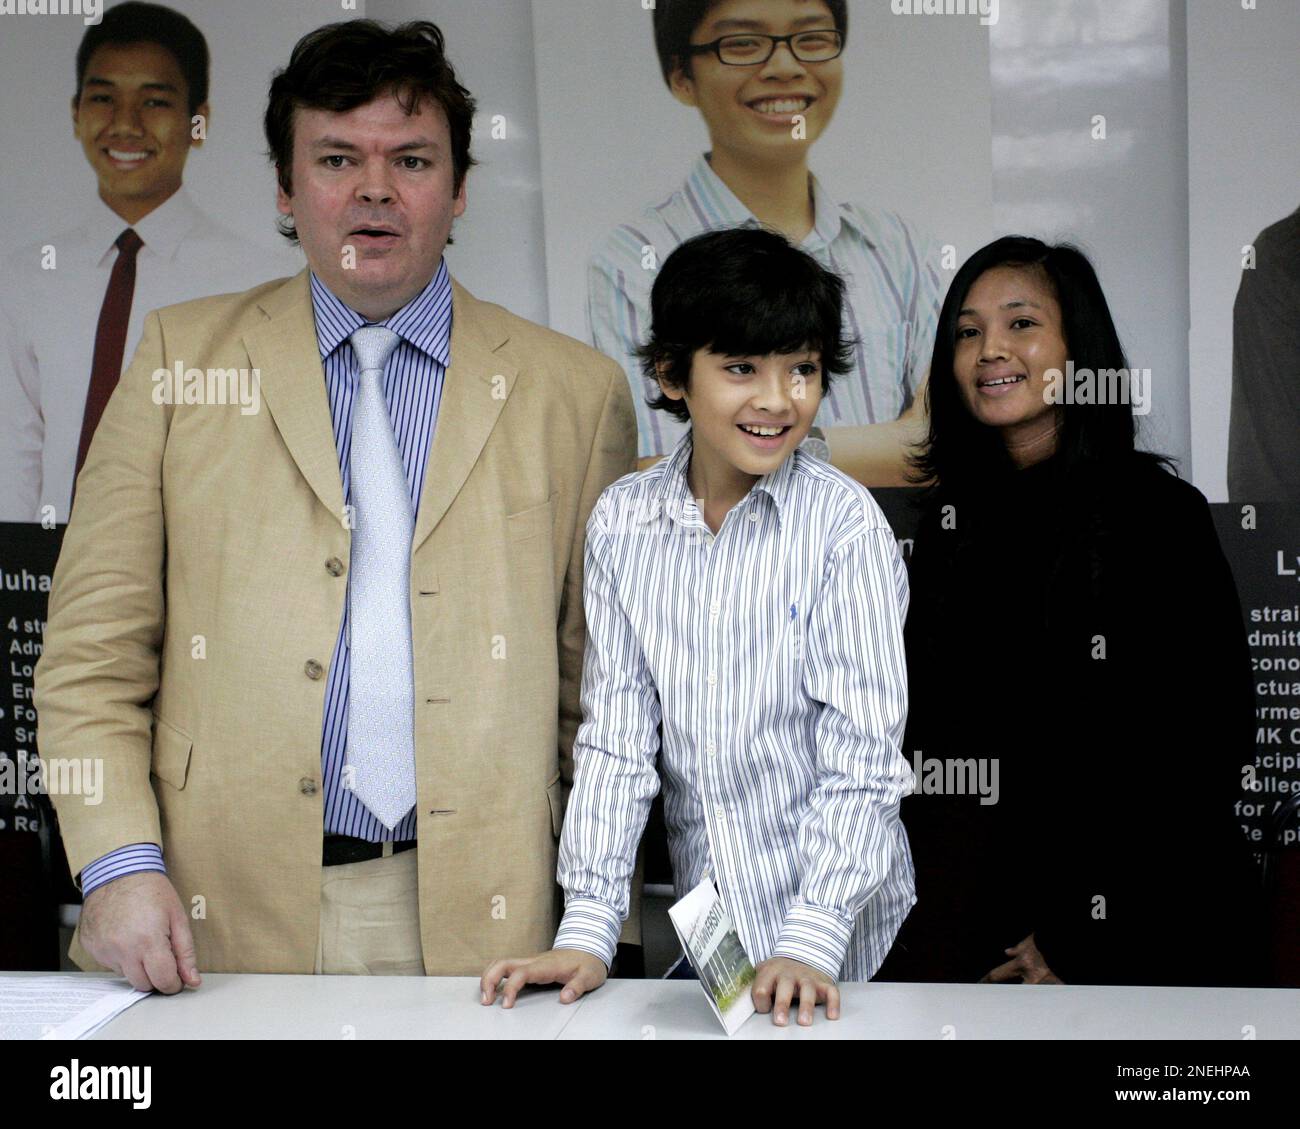 Ainan Celeste Cawley, 10, poses with his father Valentine Cawley, left, and his mother Syahidah Osman after a press conference in Kuala Lumpur, Malaysia, Monday, Jan. 4, 2010. The Singaporean child prodigy who passed 10th grade chemistry at the age of 7 is moving to Malaysia for higher education because the island-state is too rigid to accommodate gifted children, his father said Monday. (AP Photo/Lai Seng Sin) Stock Photo